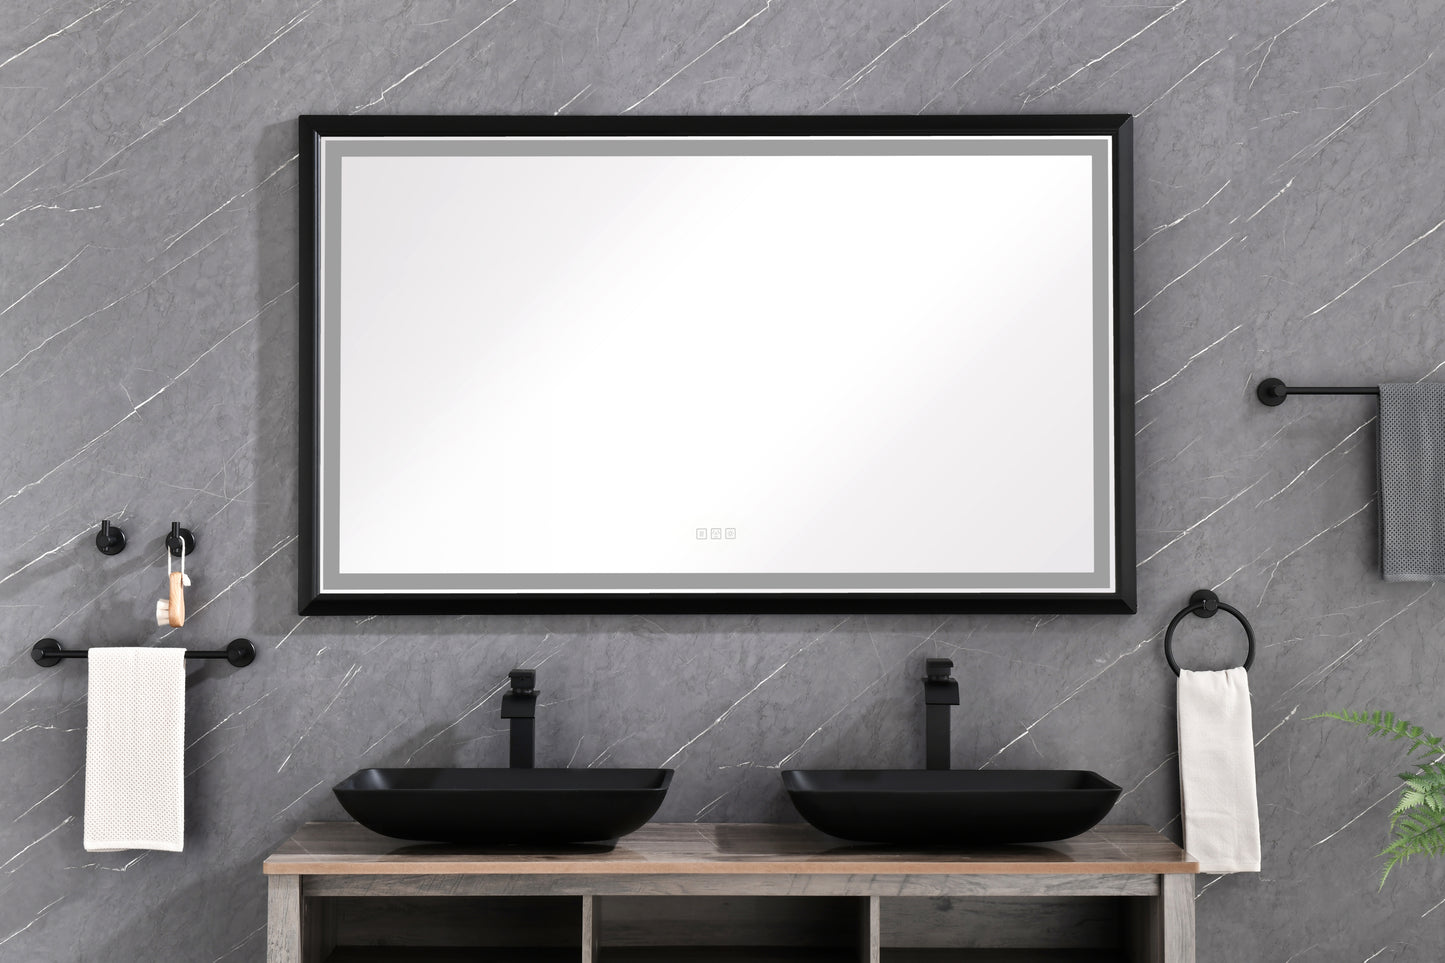 LTL needs to consult the warehouse address72in. W x 36in. H Oversized Rectangular Black Framed LED Mirror Anti-Fog Dimmable Wall Mount Bathroom Vanity Mirror